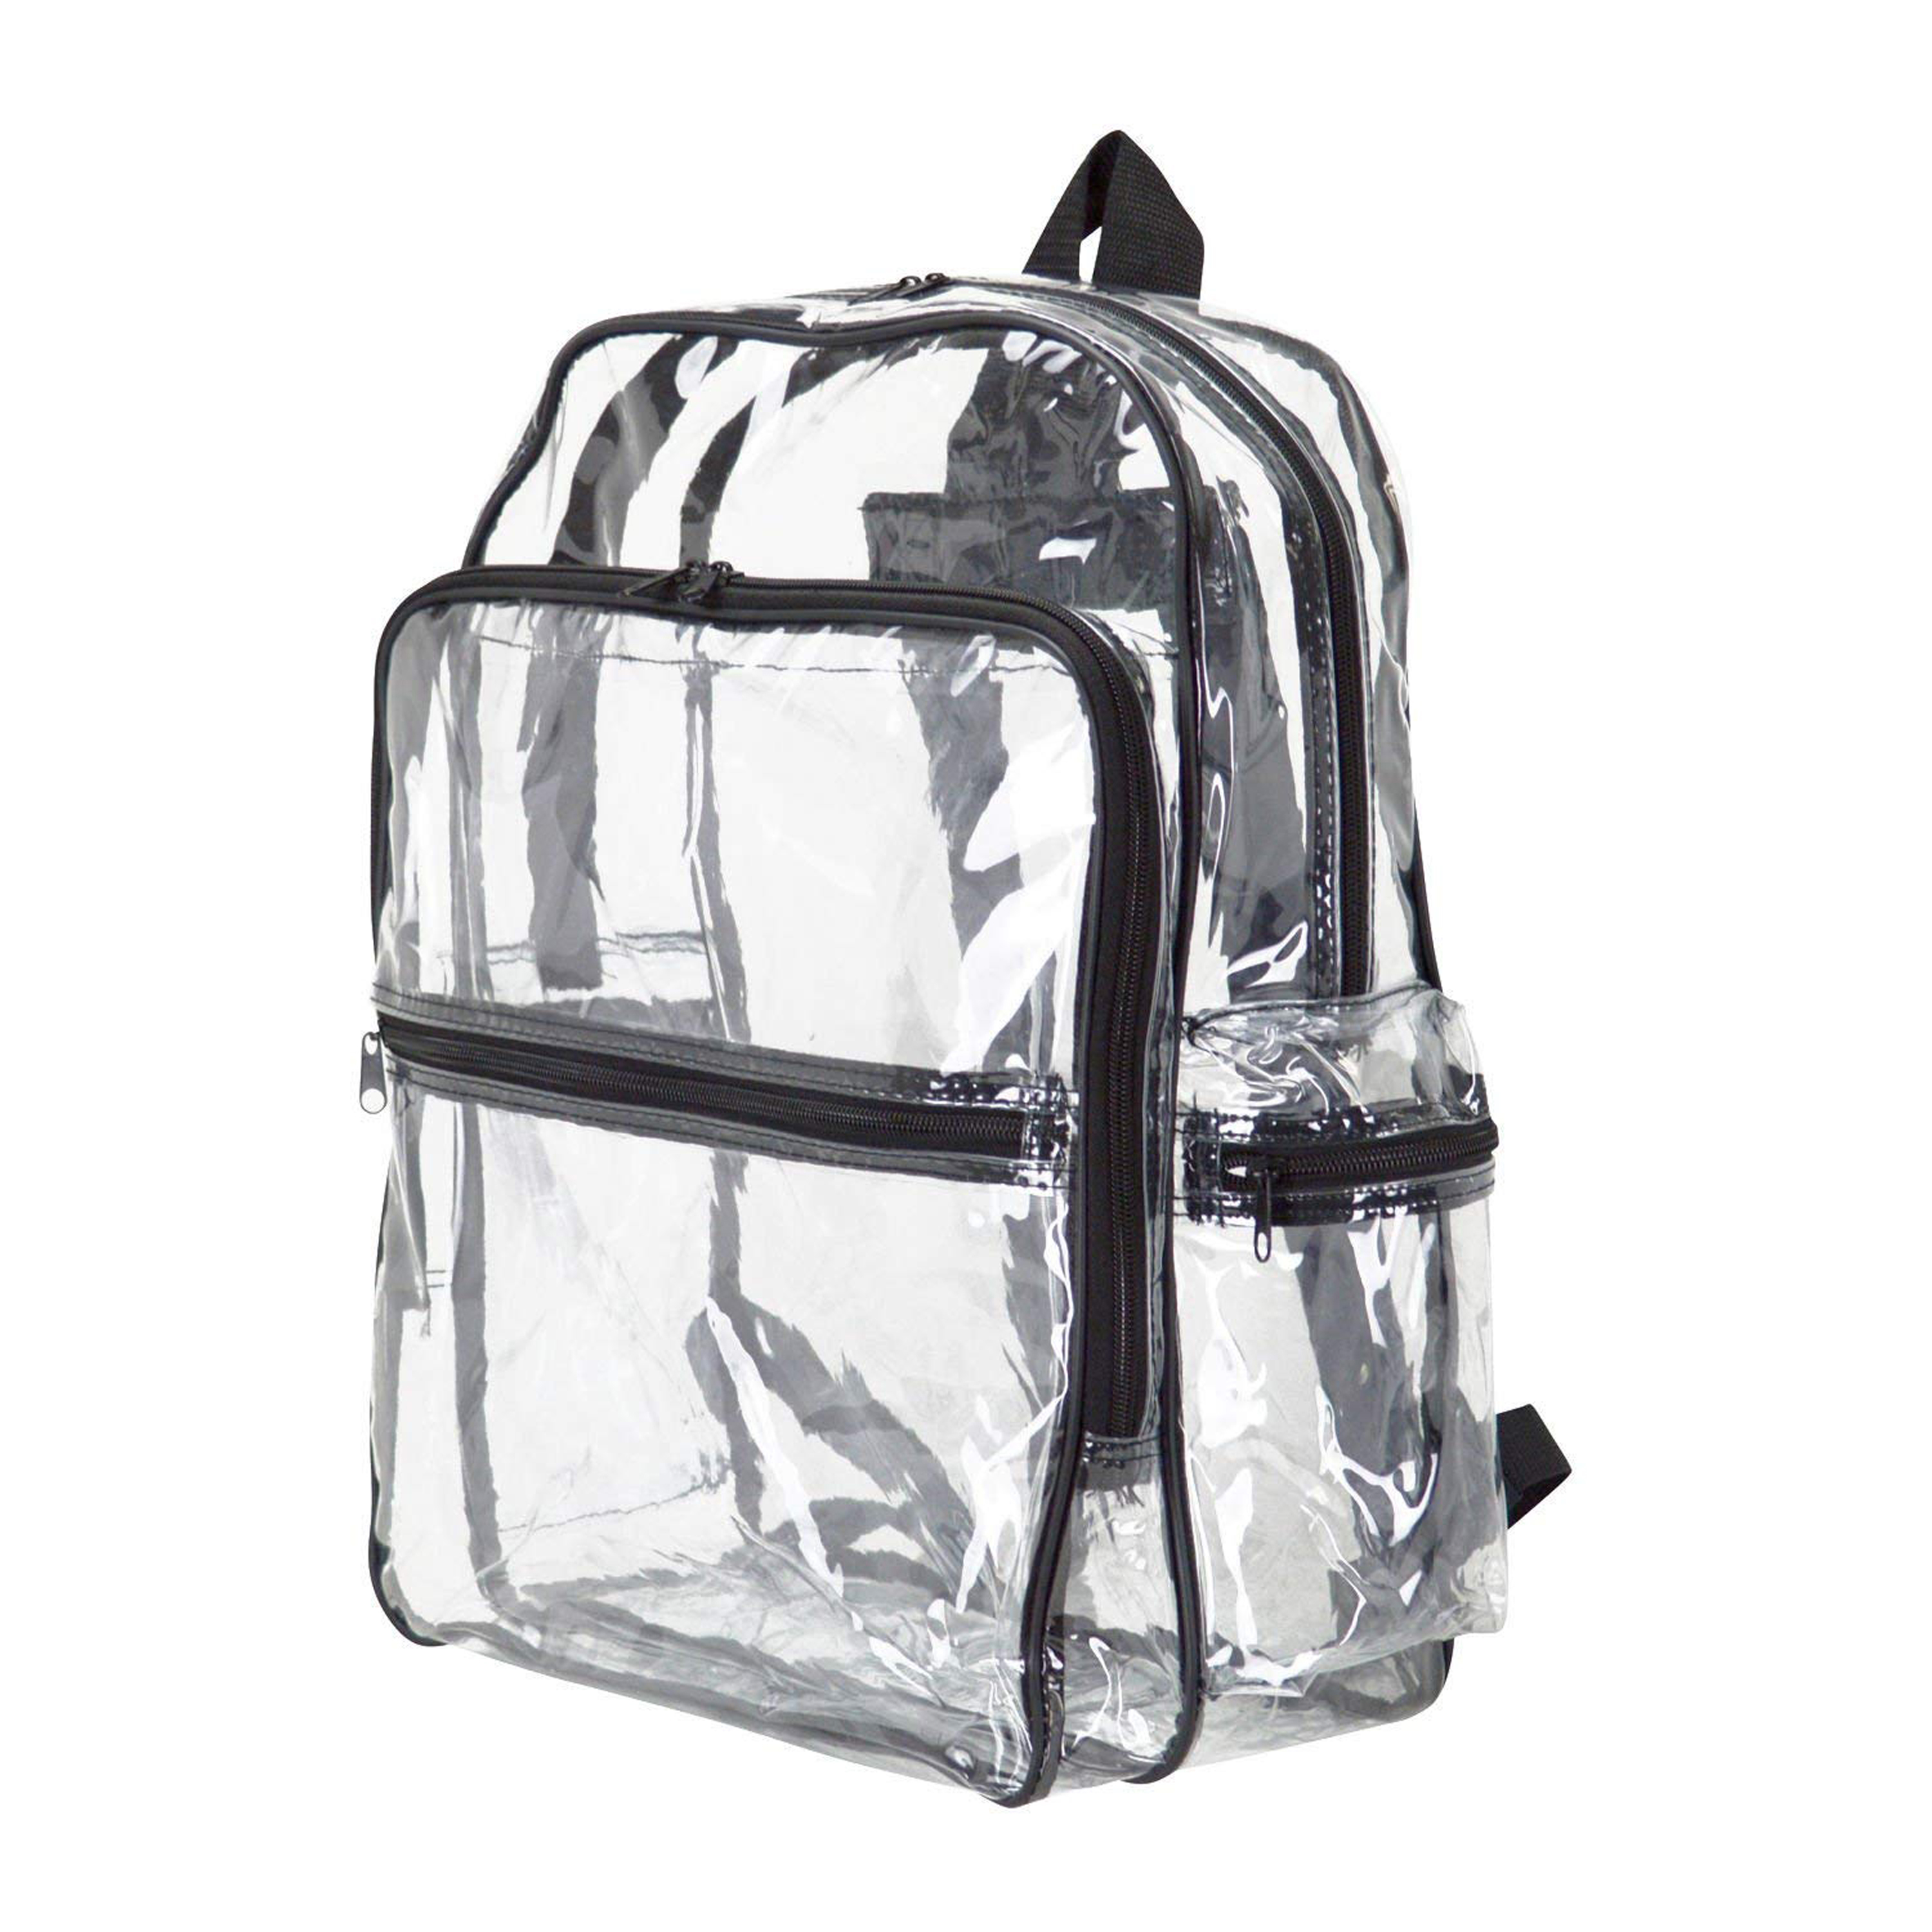 ImpecGear Kid's Clear Backpack, Adults School Clear Backpack, Outdoor Transparent Backpacks. - image 1 of 5